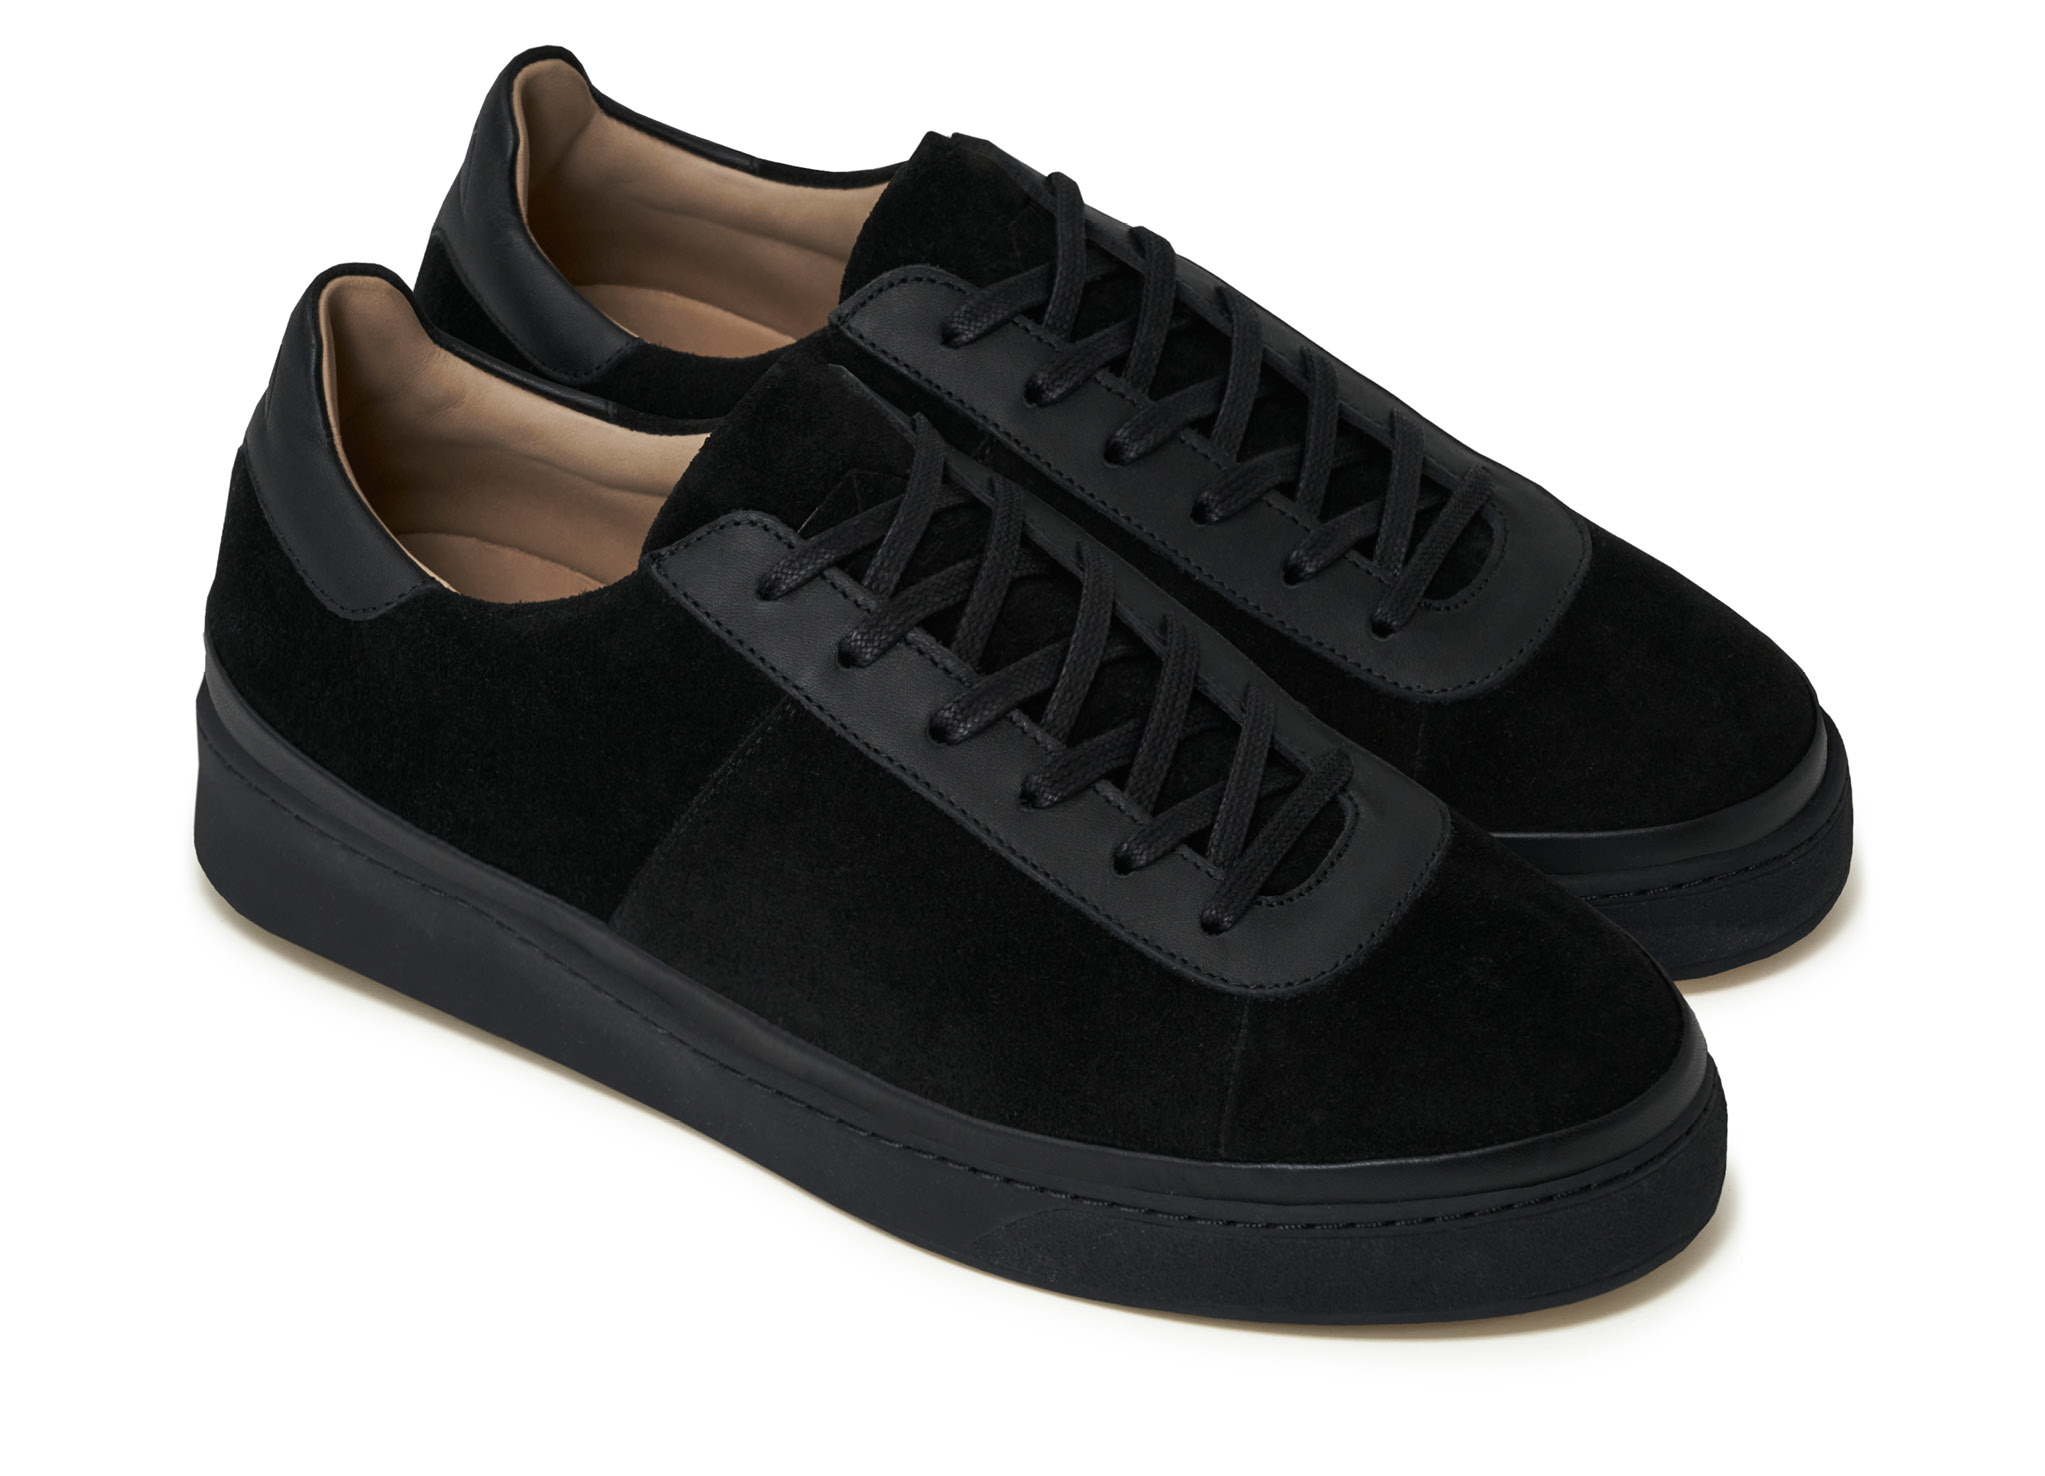 Black Sneakers for Men | MULO Shoes | High-quality Italian Suede